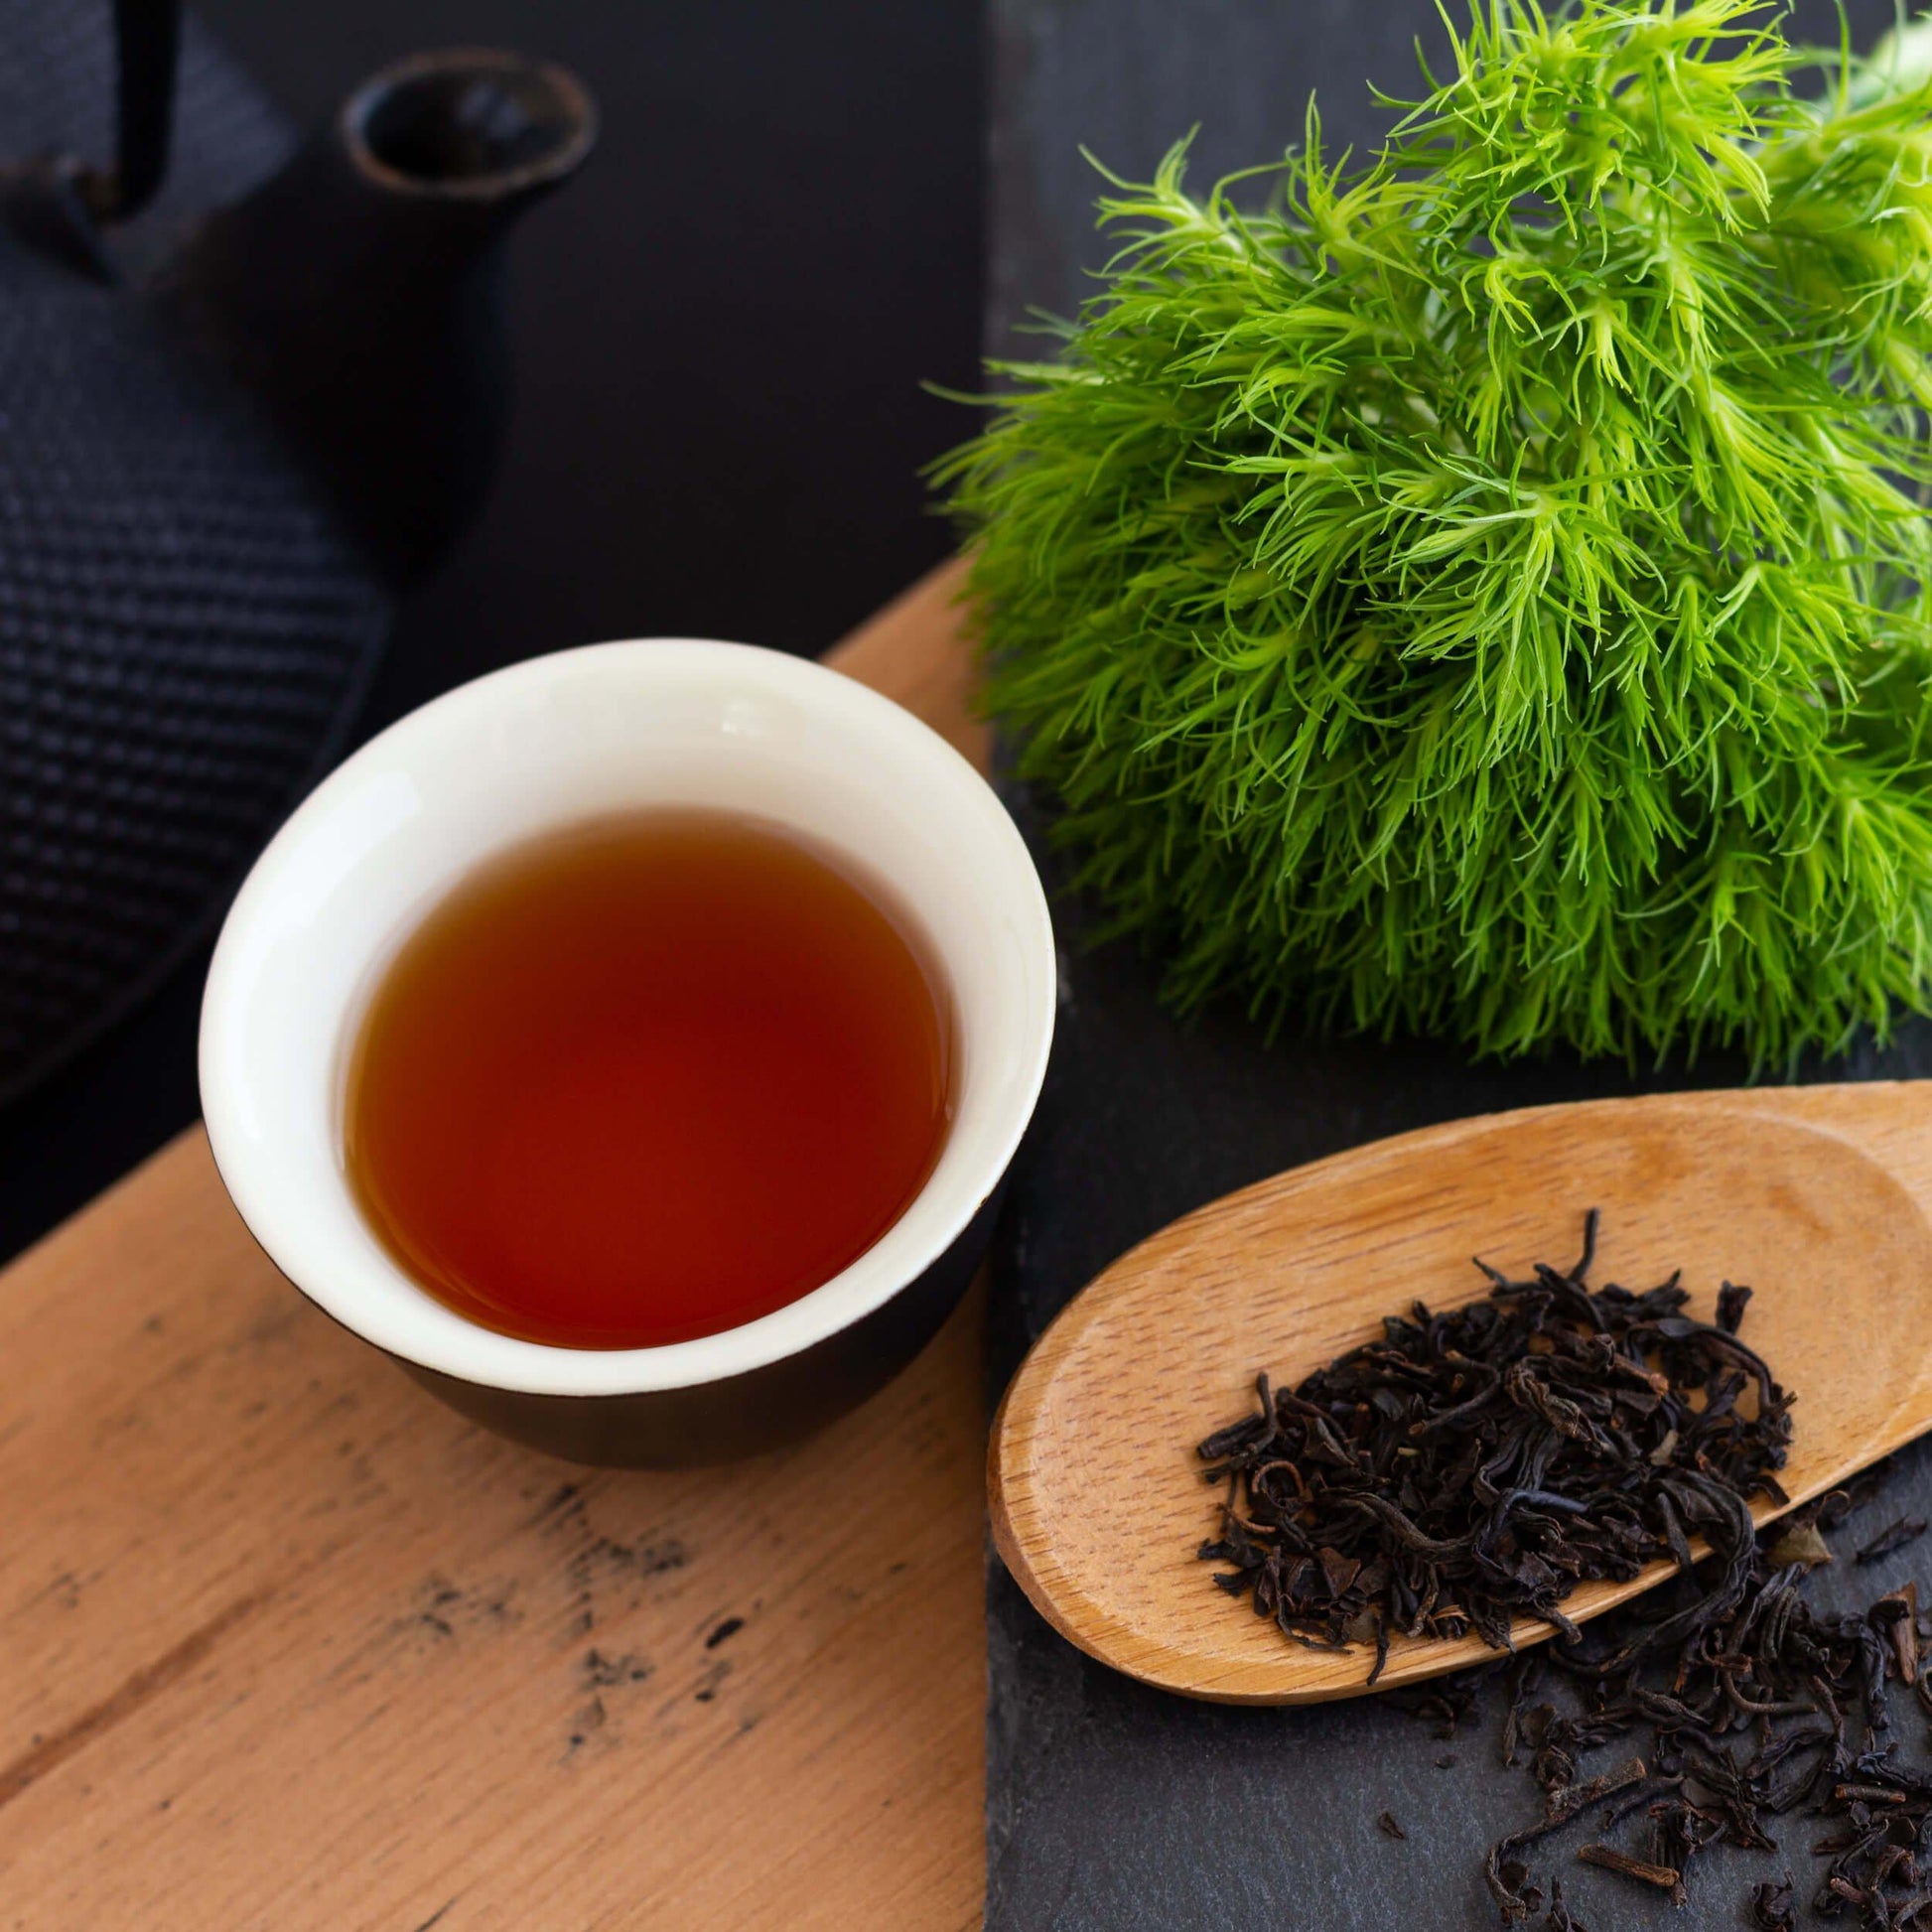 Japanese Wakoucha Organic Black Tea shown as brewed tea in a small black teacup with white interior. A leafy green plant in nearby, as well as a wooden spoon with loose tea leaves. The background is dark.